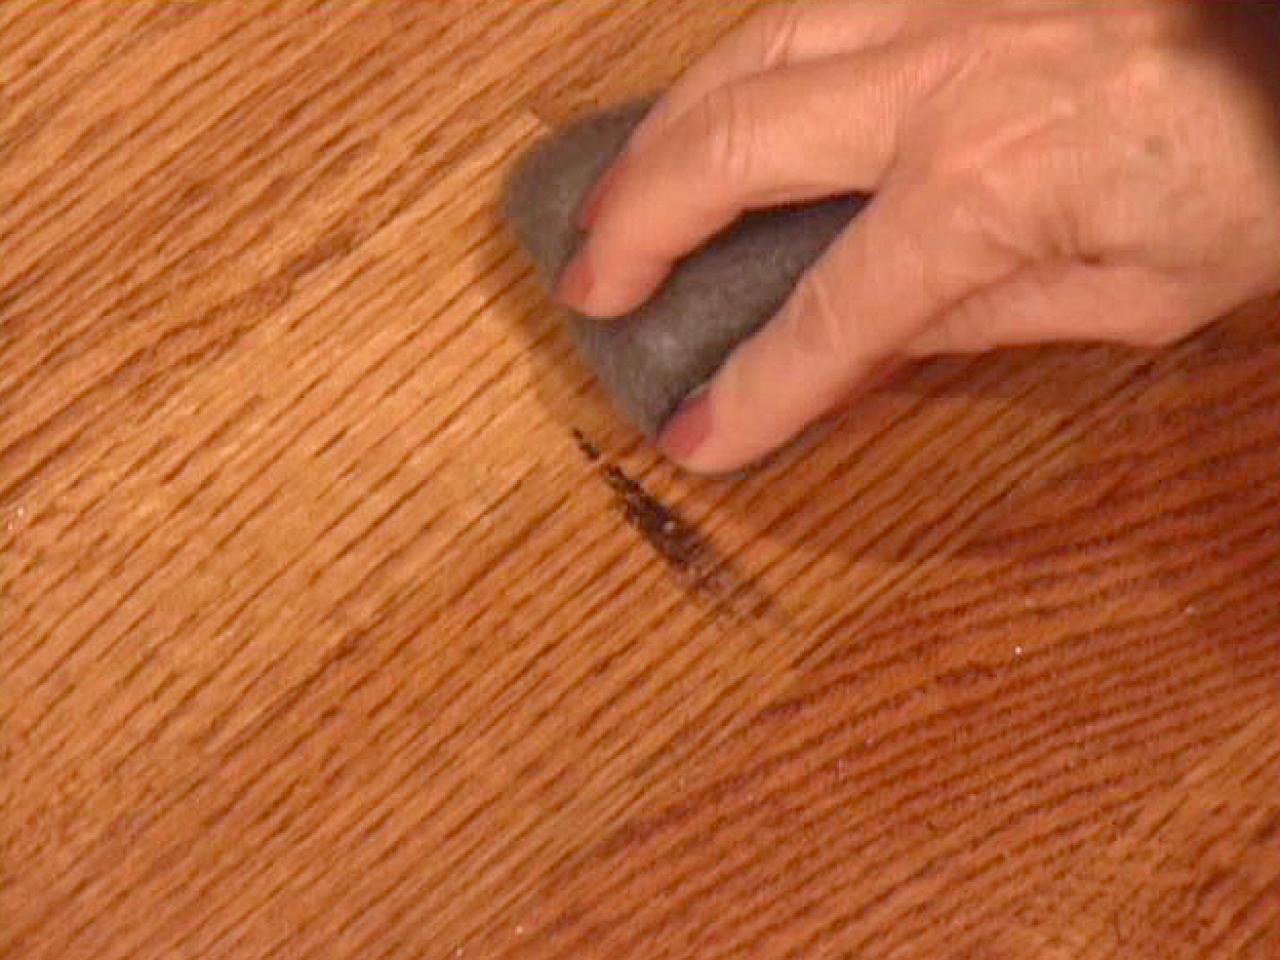 How To Touch Up Wood Floors Tos Diy, How To Clean And Wax Hardwood Floors